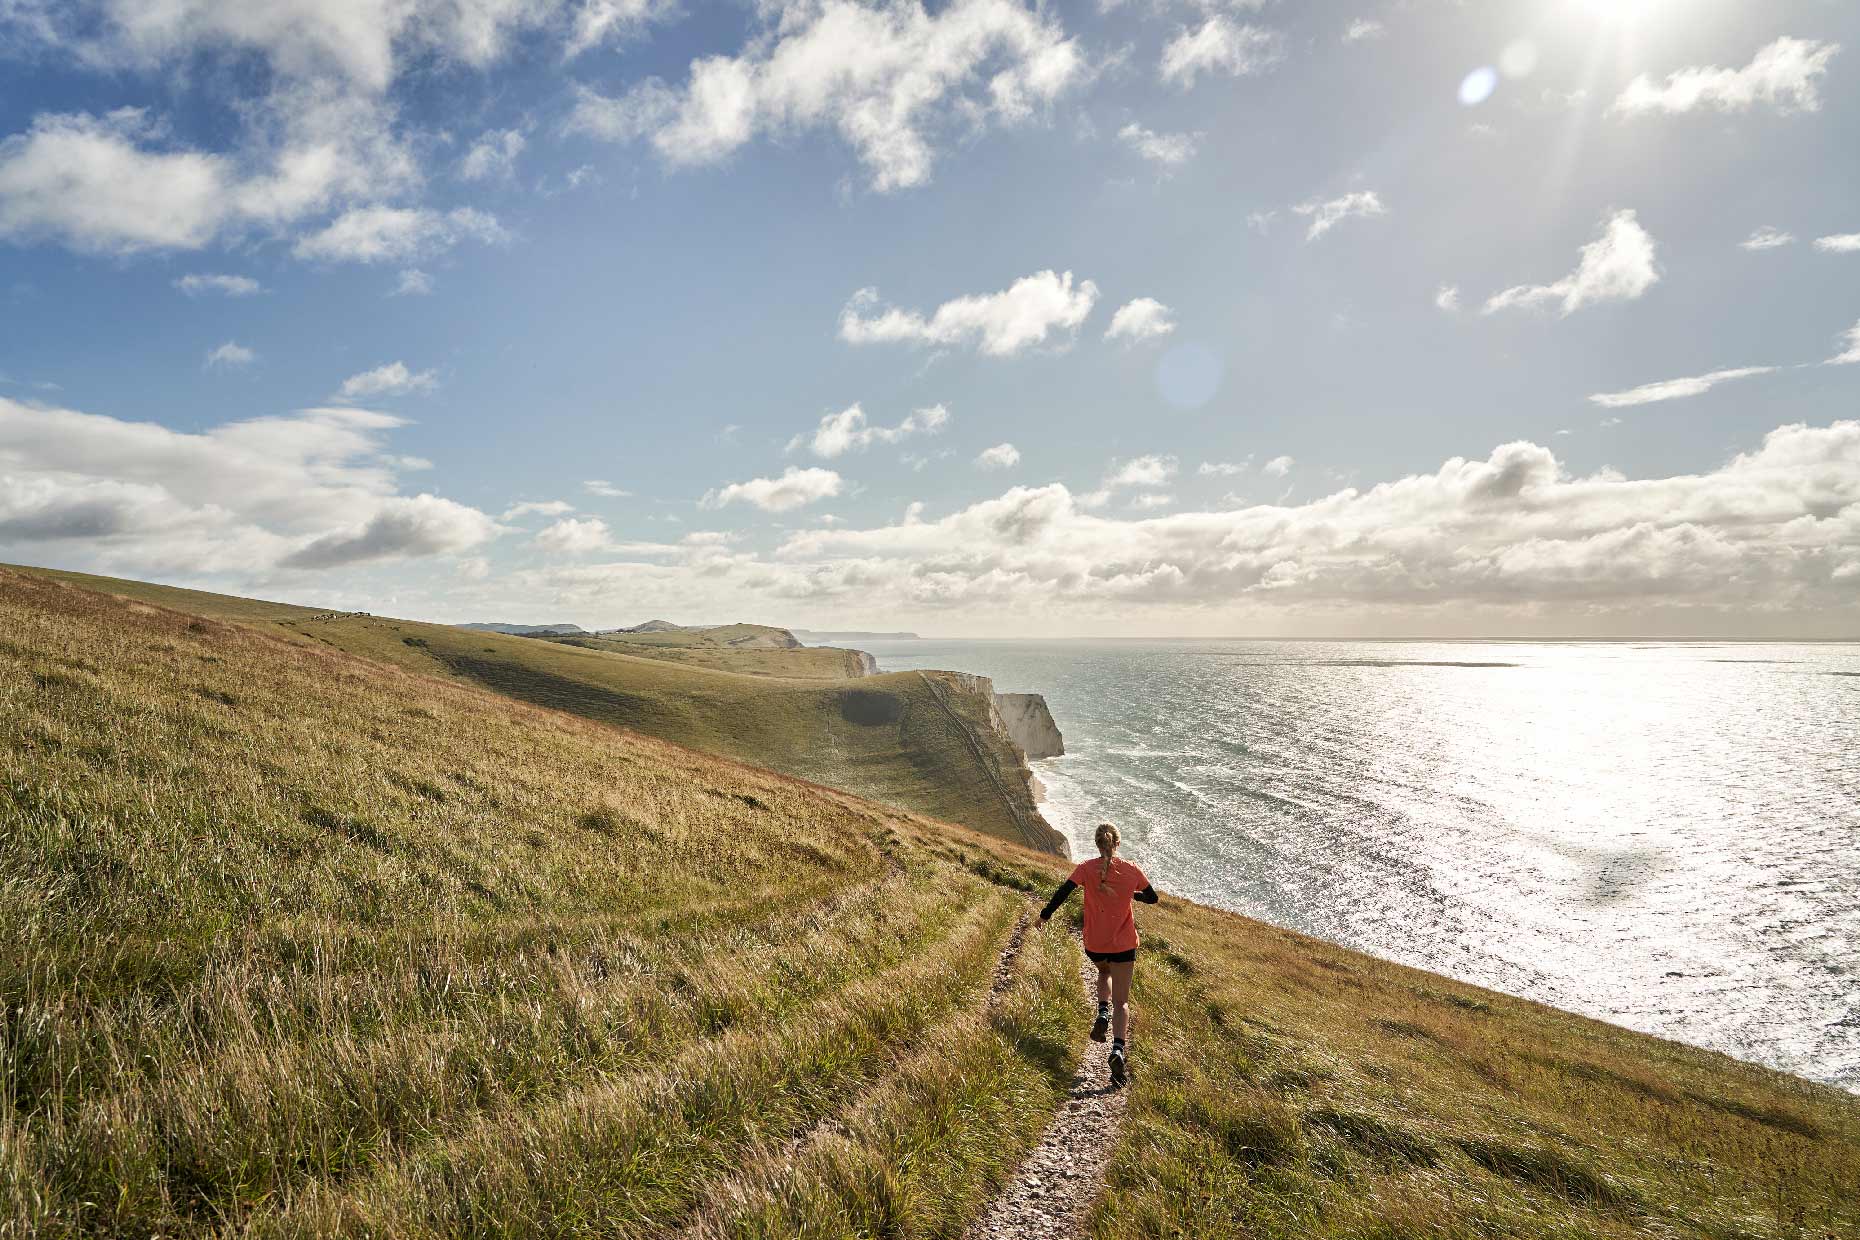 Jurassic Coast trail running for Merrell Natural Wonders with Brittany